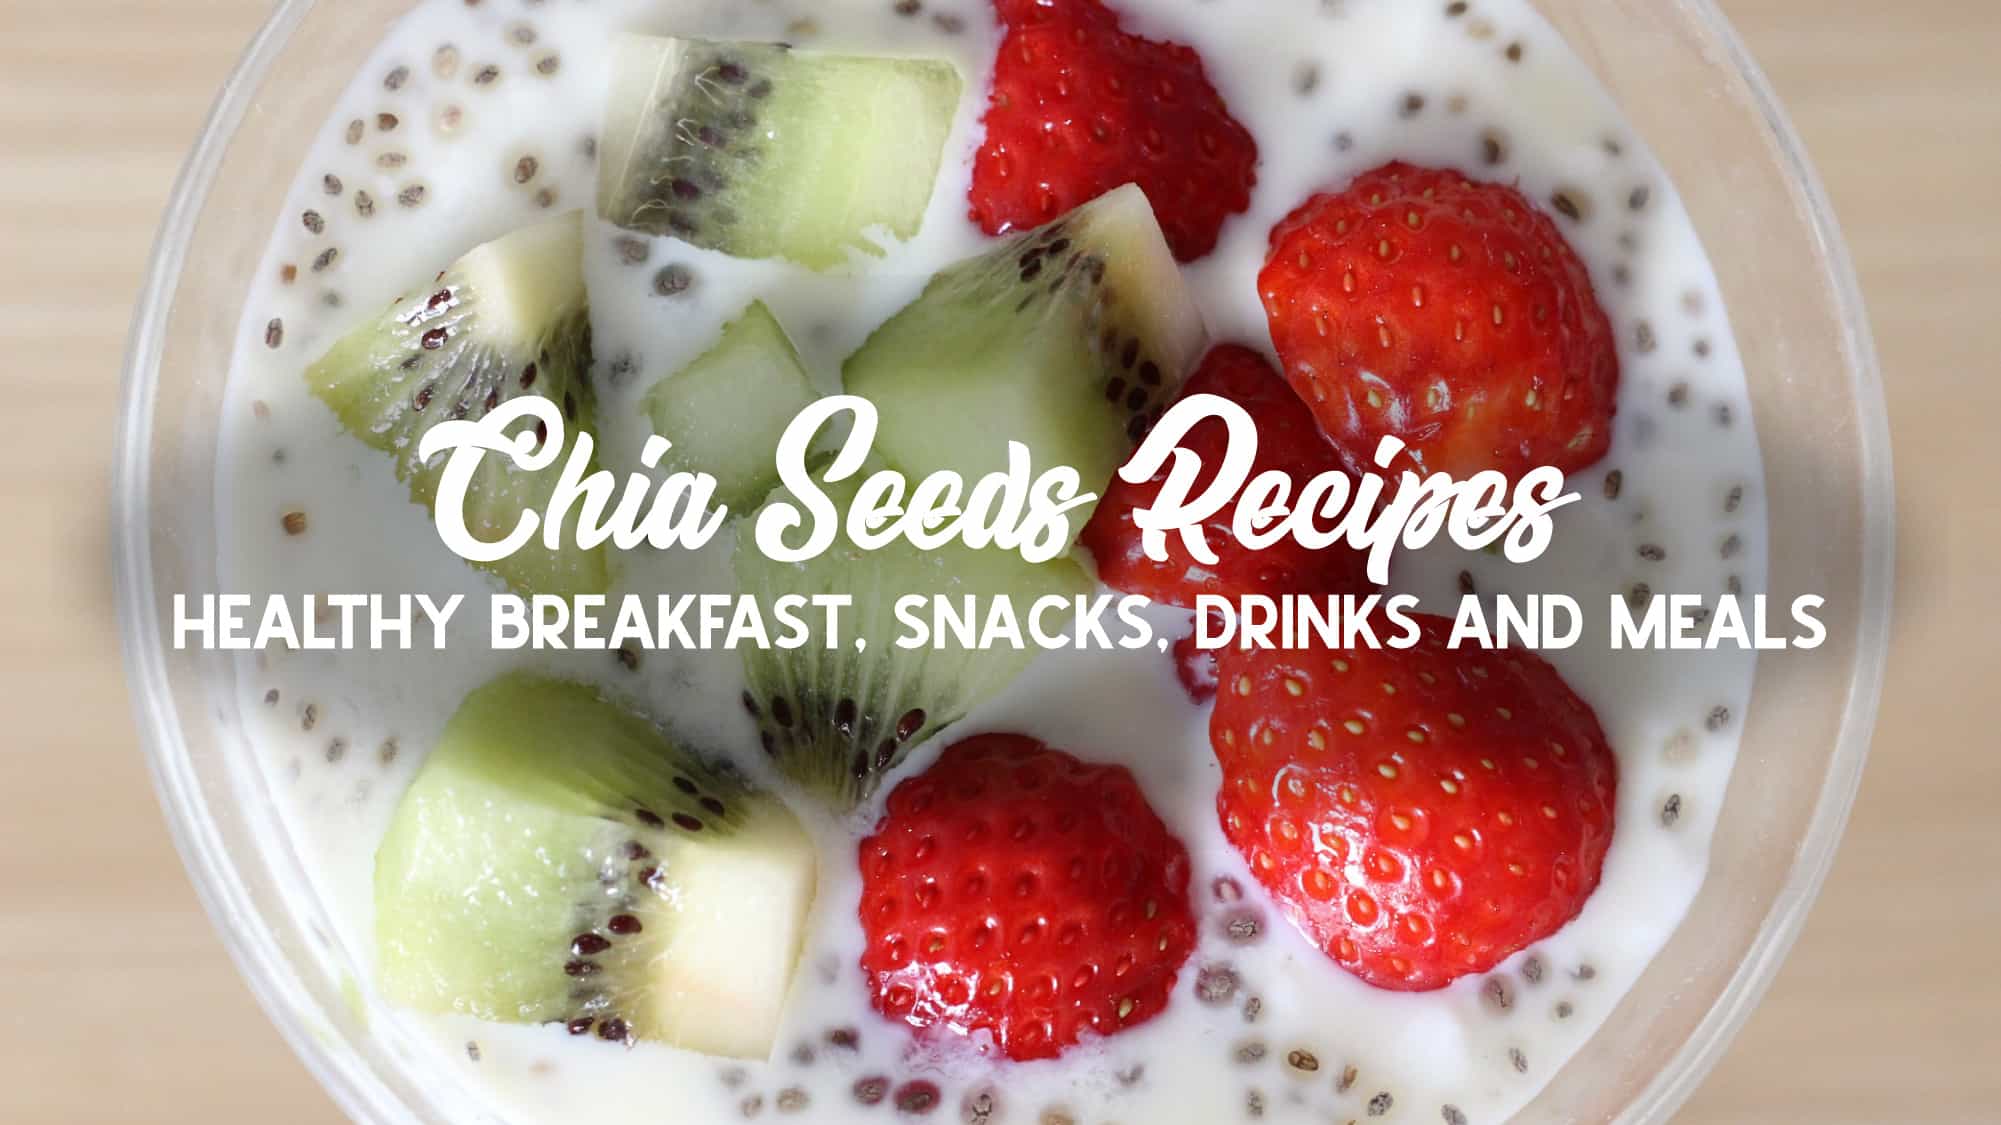 Chia Seed Recipes - Healthy Breakfast, snacks, drinks and meals